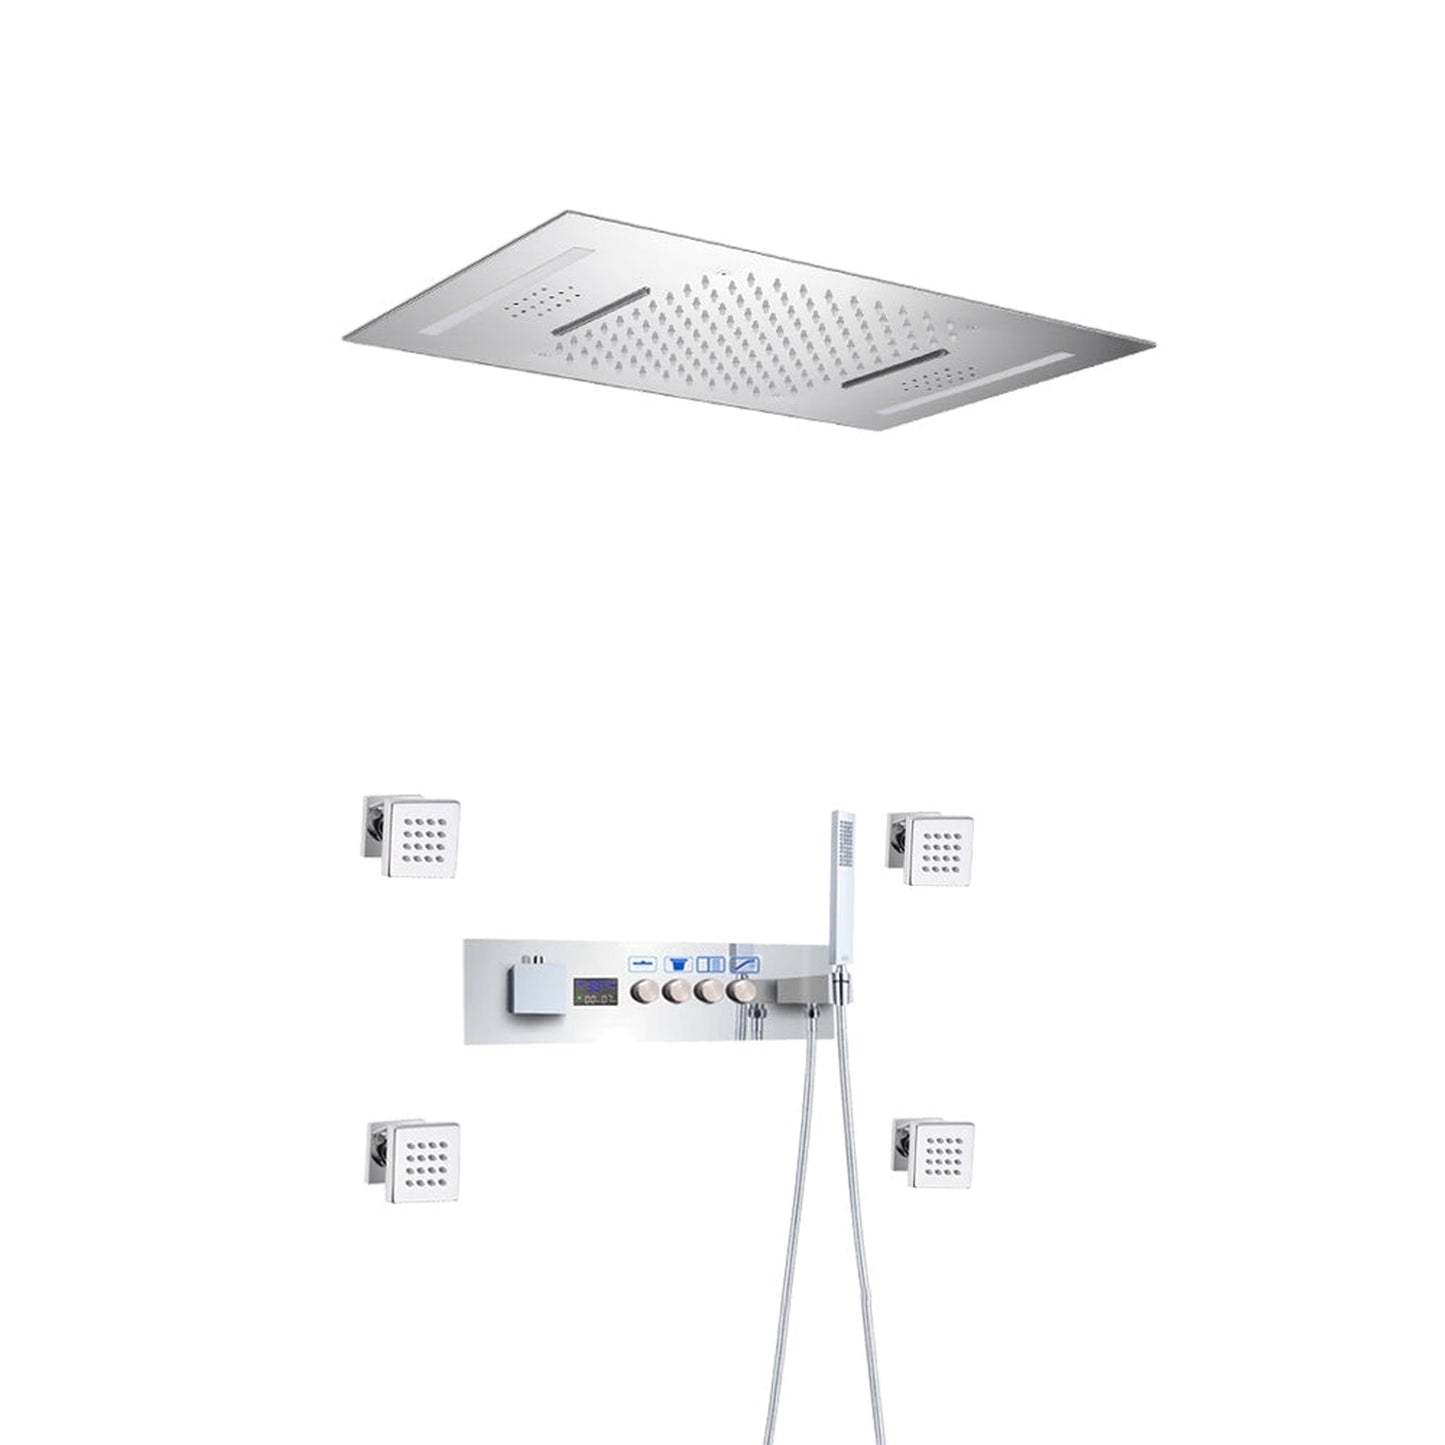 Fontana Ravenna Chrome Recessed Ceiling Mounted LED Thermostatic Rainfall Shower System With 4-Jet Body Sprays and Hand Shower